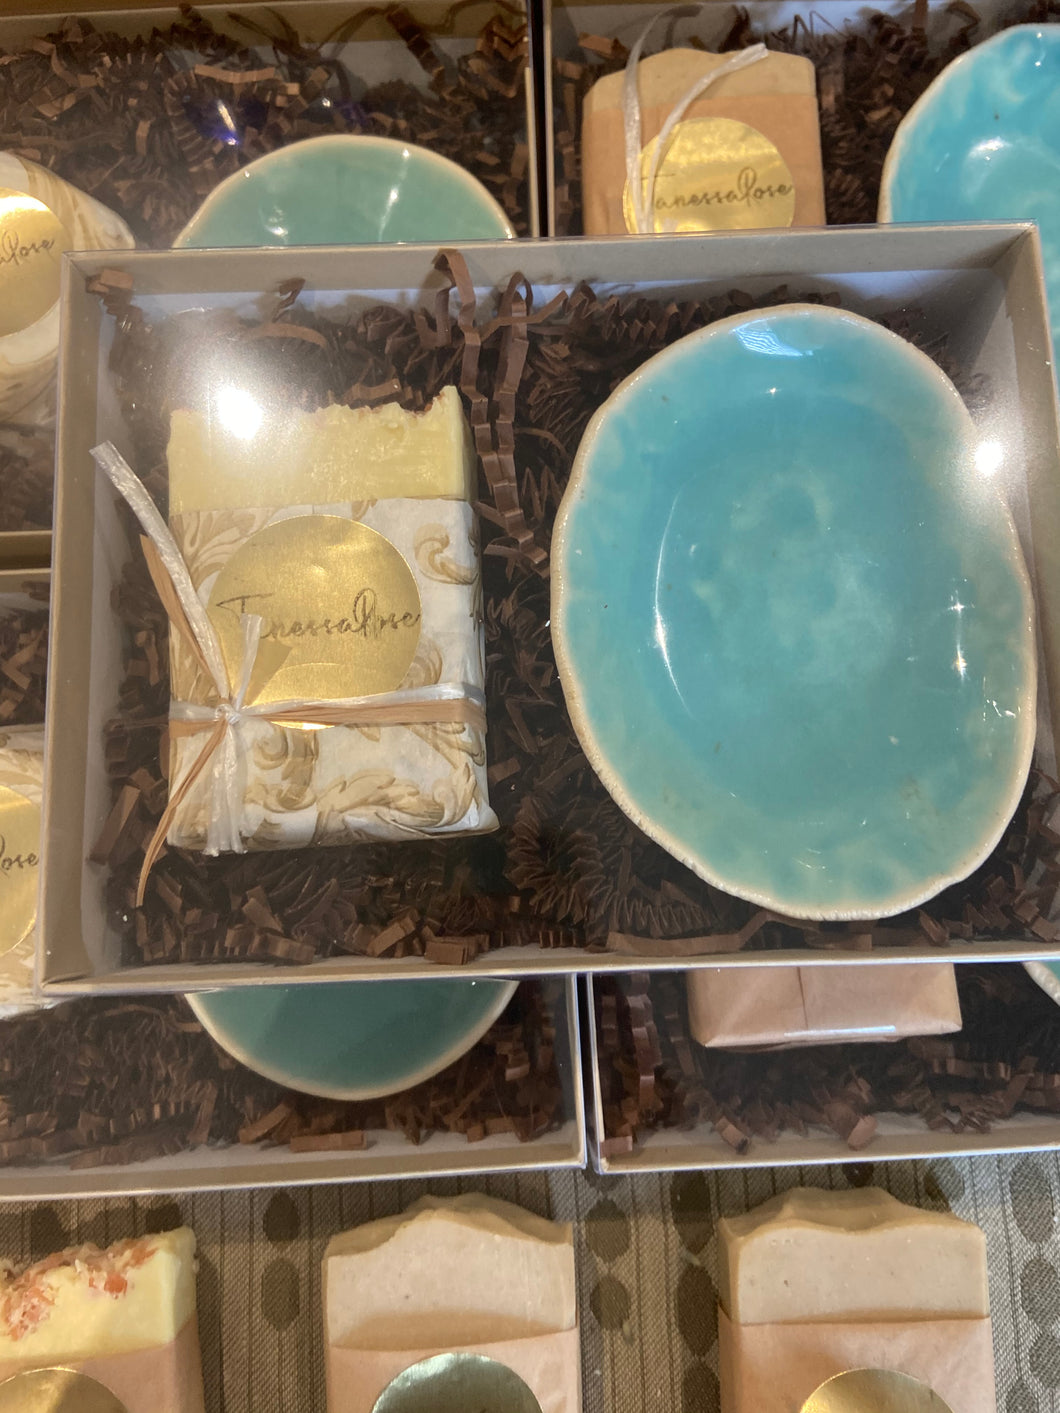 Our boxed soap gifts sets make it easier than ever to make gift giving seamless and special. They include cold-processed soap and a beautifully inspired, hand crafted soap dish in Ocean Blue or Sea Green.